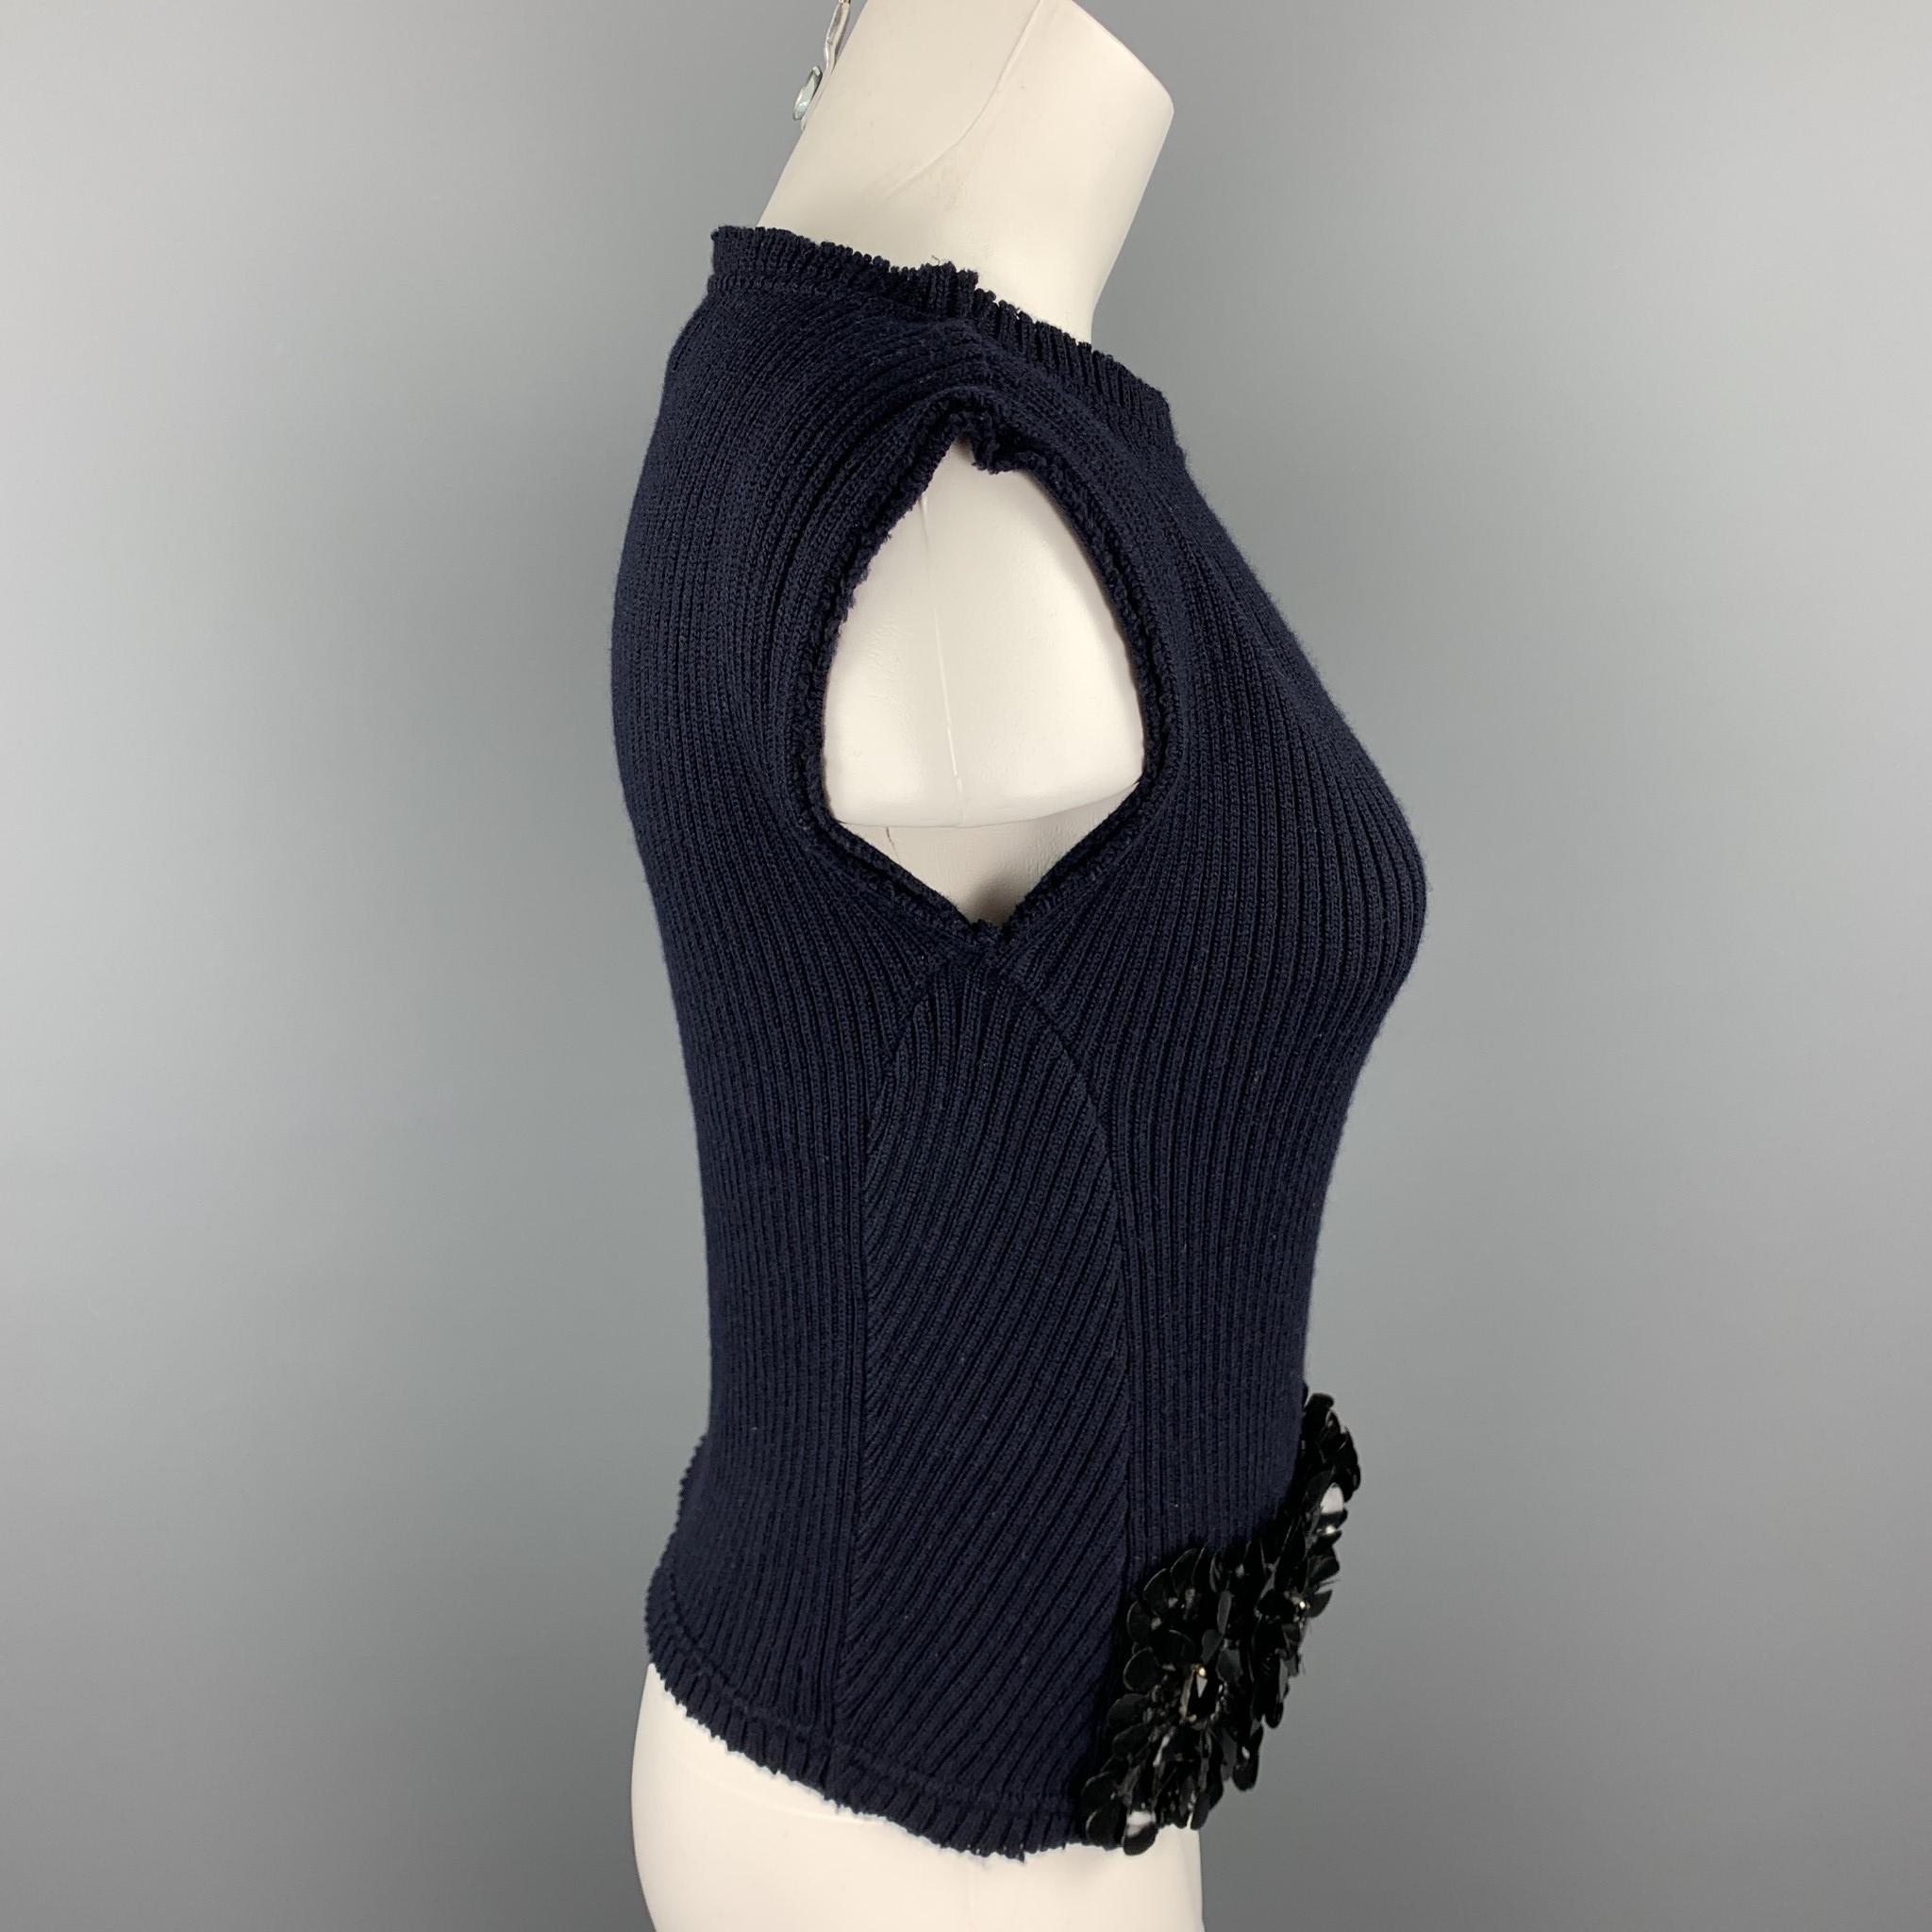 MARNI sleeveless dress top comes in a navy knitted wool with floral applique details featuring a loose neck. Made in Italy.

Excellent Pre-Owned Condition.
Marked: IT 38

Measurements:

Shoulder: 17 in. 
Bust: 32 in. 
Length: 18.5 in.